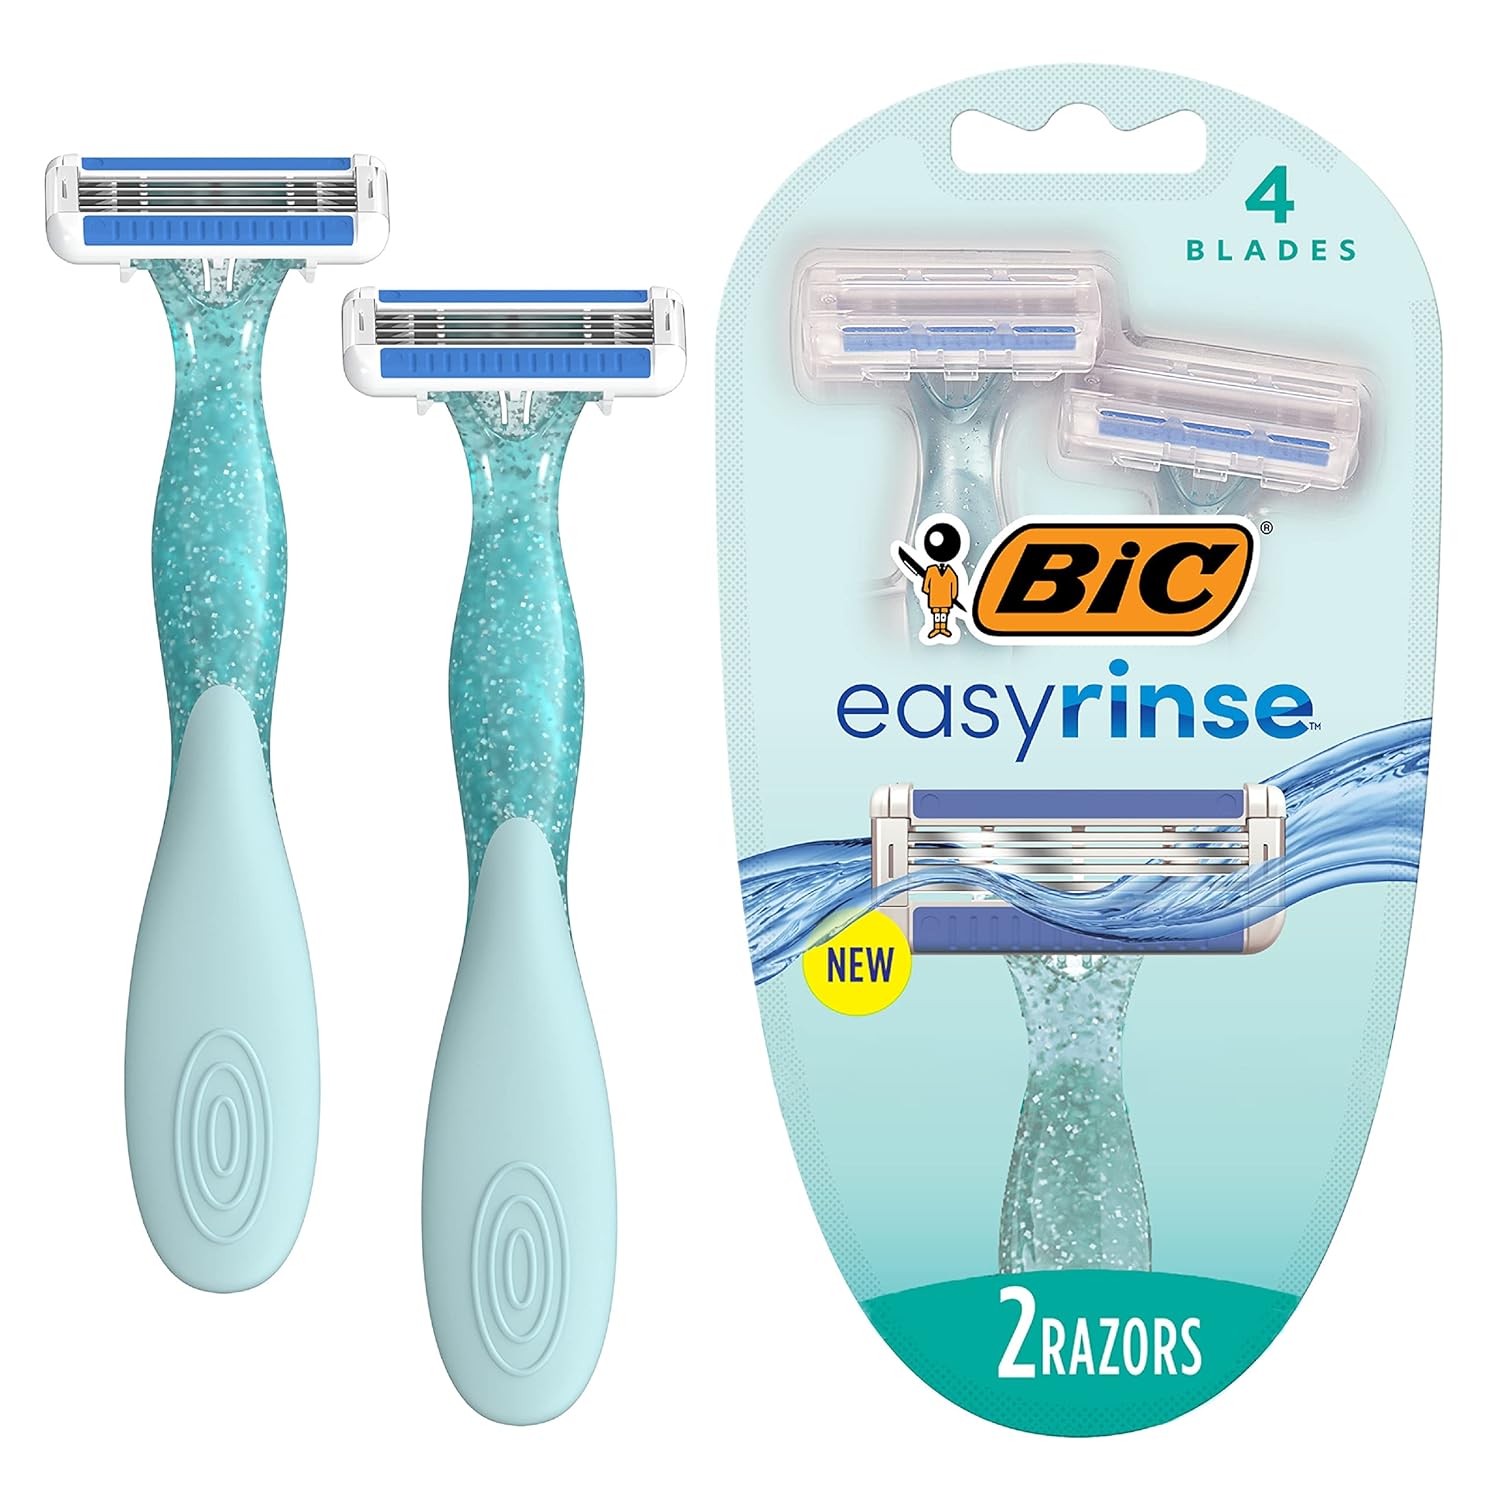 BIC EasyRinse Anti-Clogging Women' Disposable Razors for a Smoother Shave With Less Irritation*, Easy Rinse Shaving Razors With 4 Blades, 2 Count